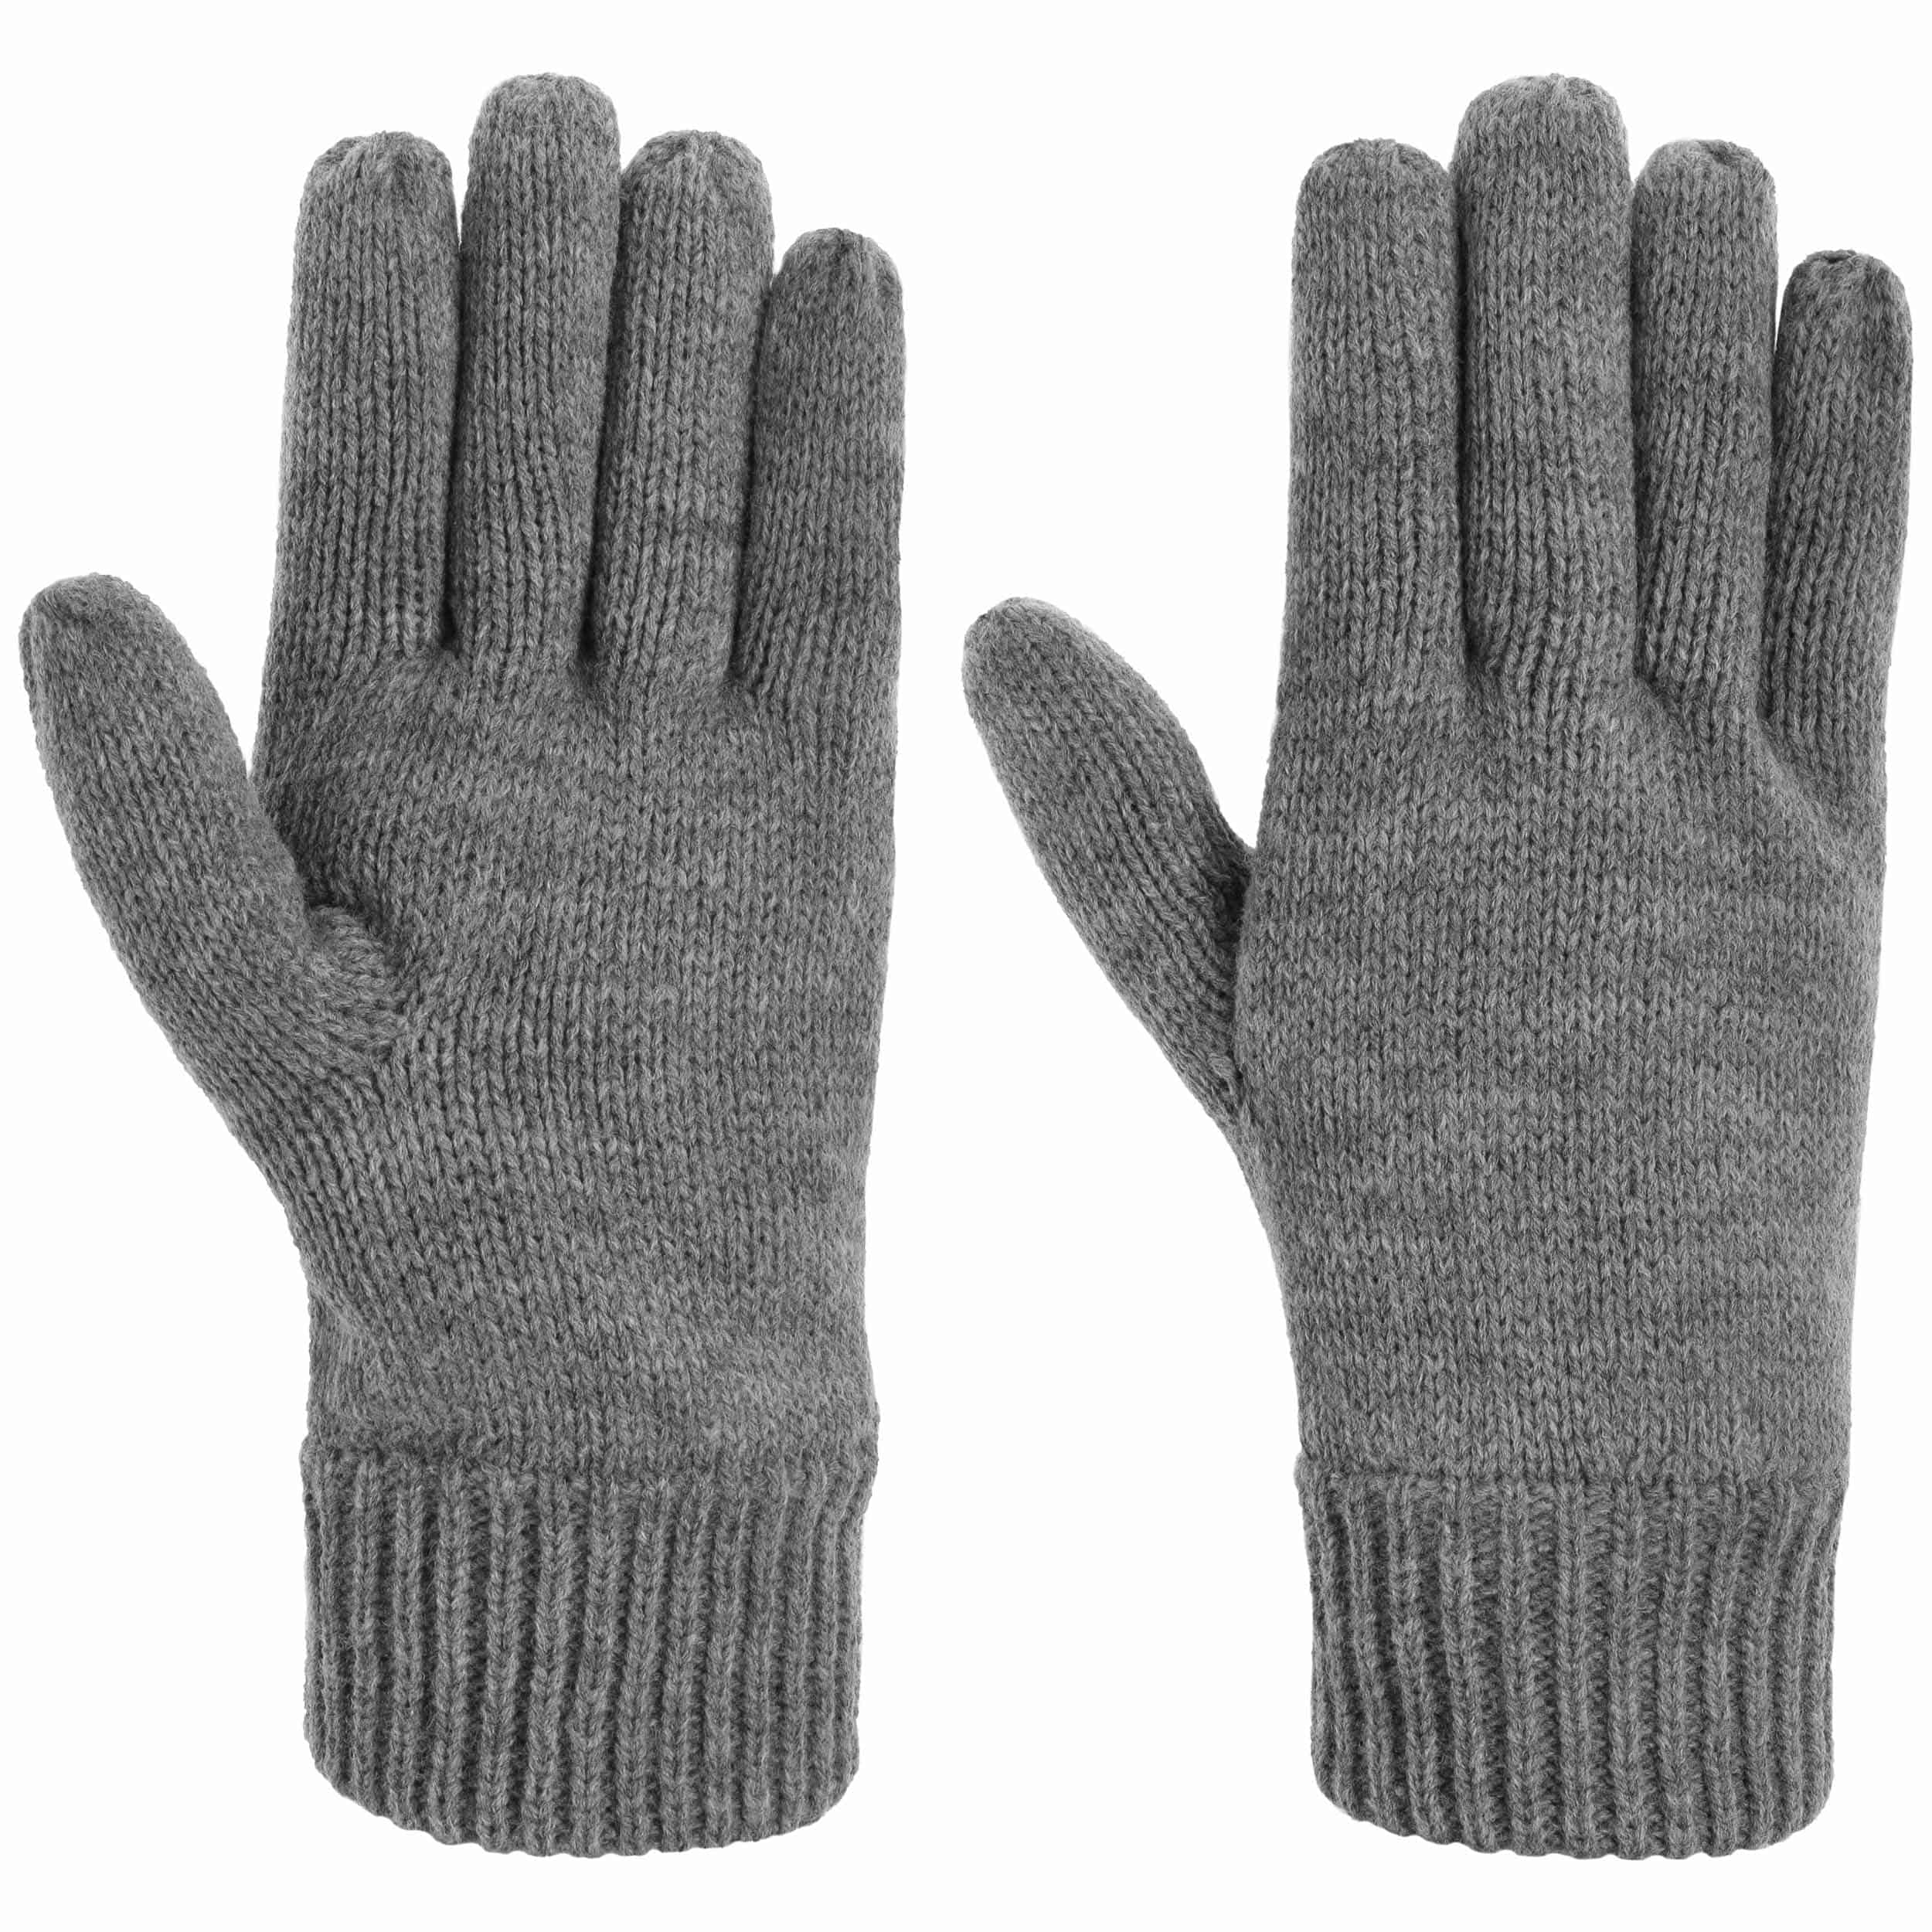 Thinsulate 3M Knit Gloves by Lipodo - 19,95 €